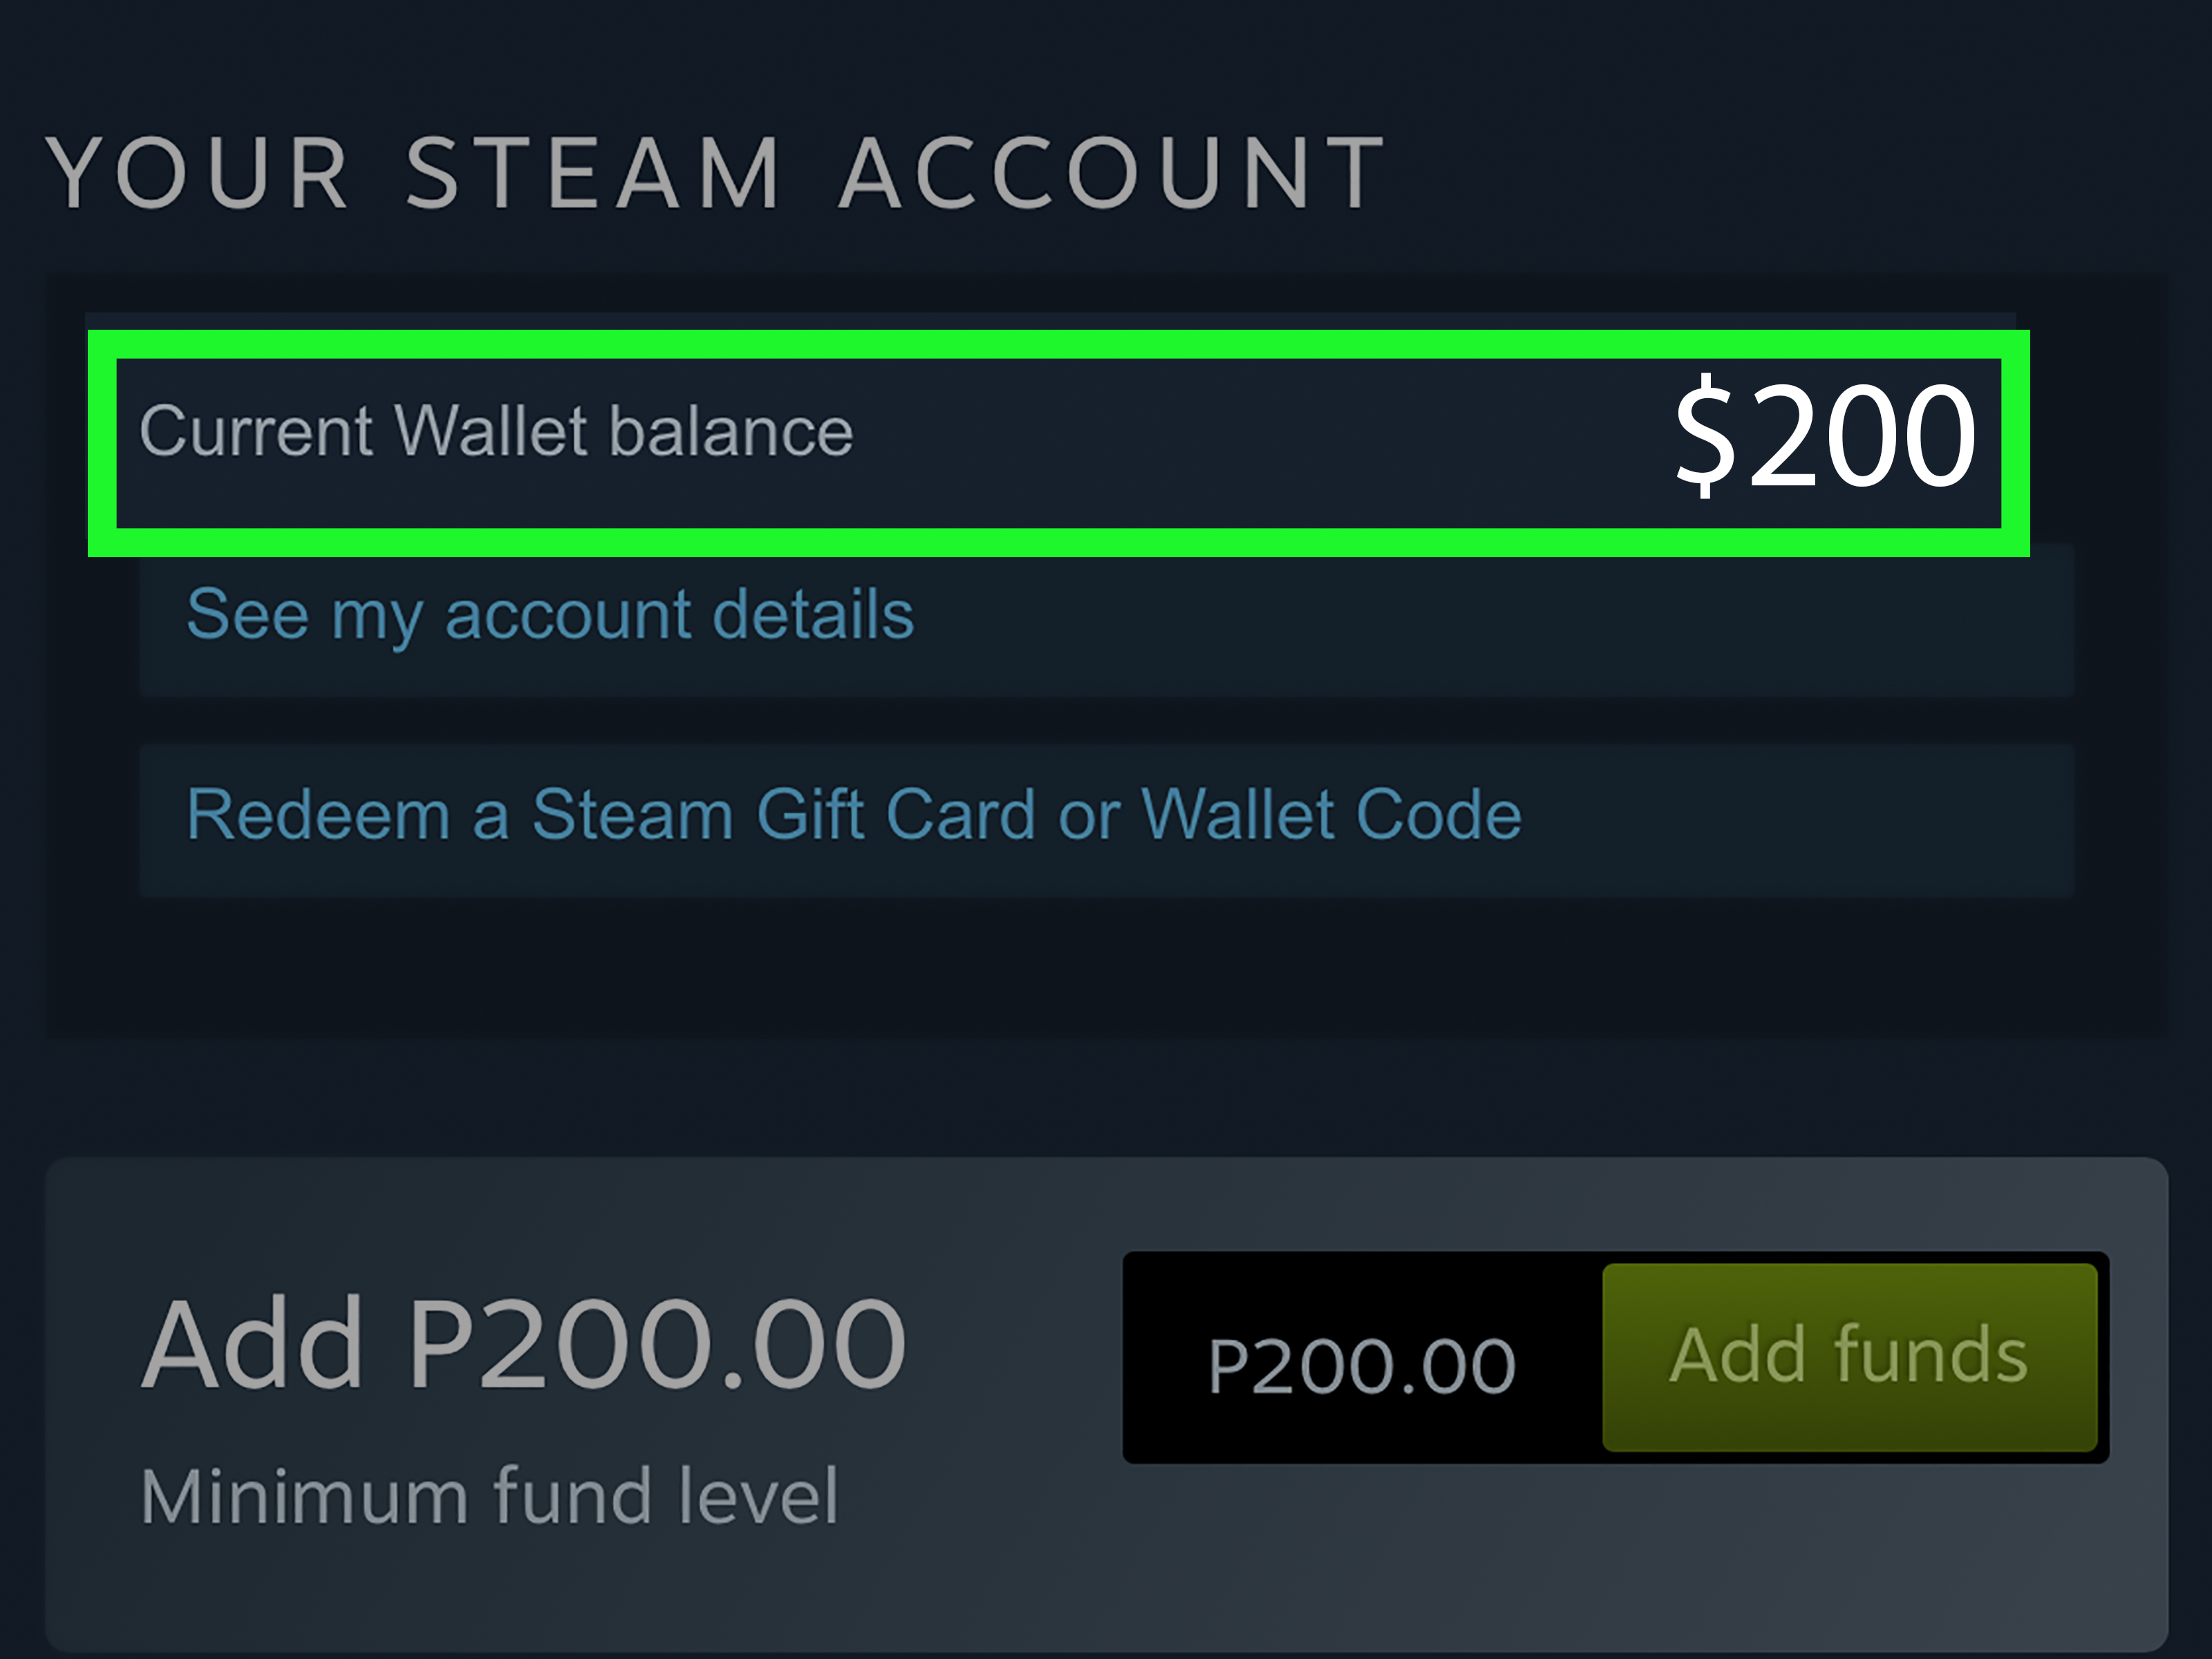 How to Redeem Steam Wallet Codes and Gift Cards